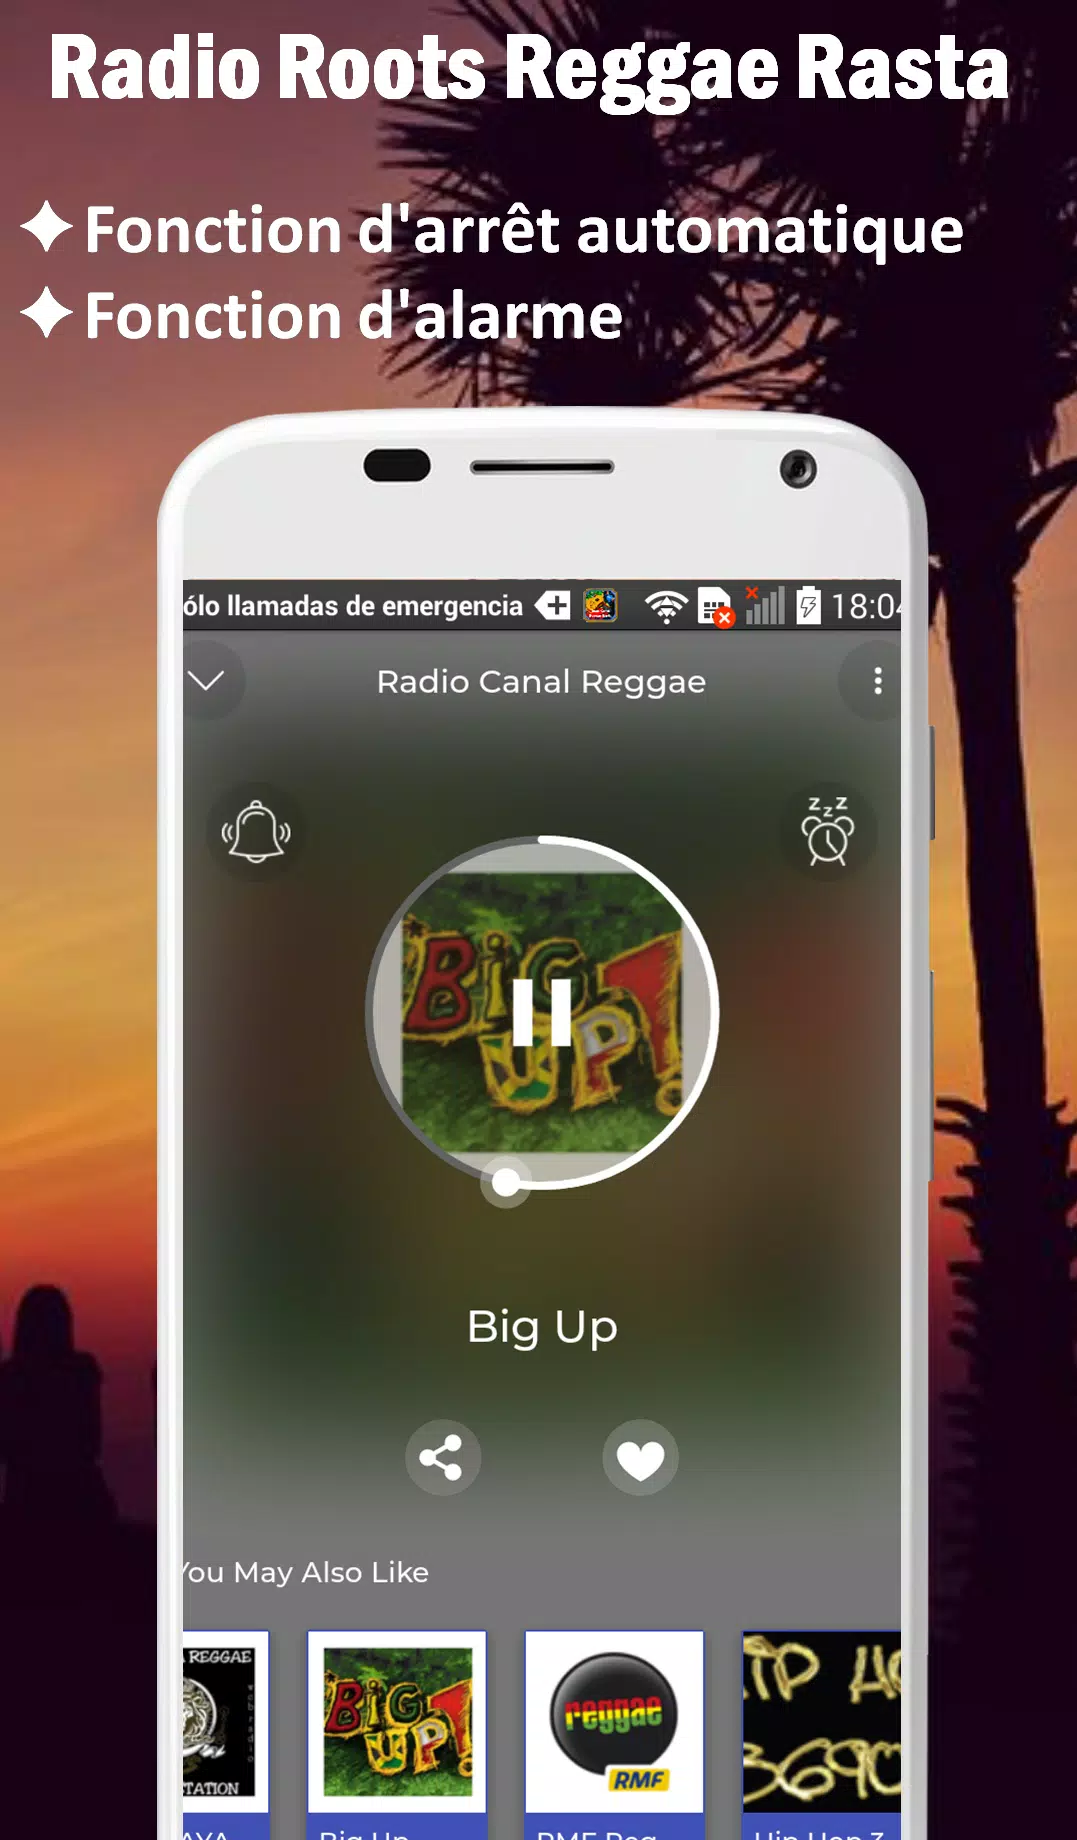 Radio Roots Reggae Music Rasta APK pour Android Télécharger